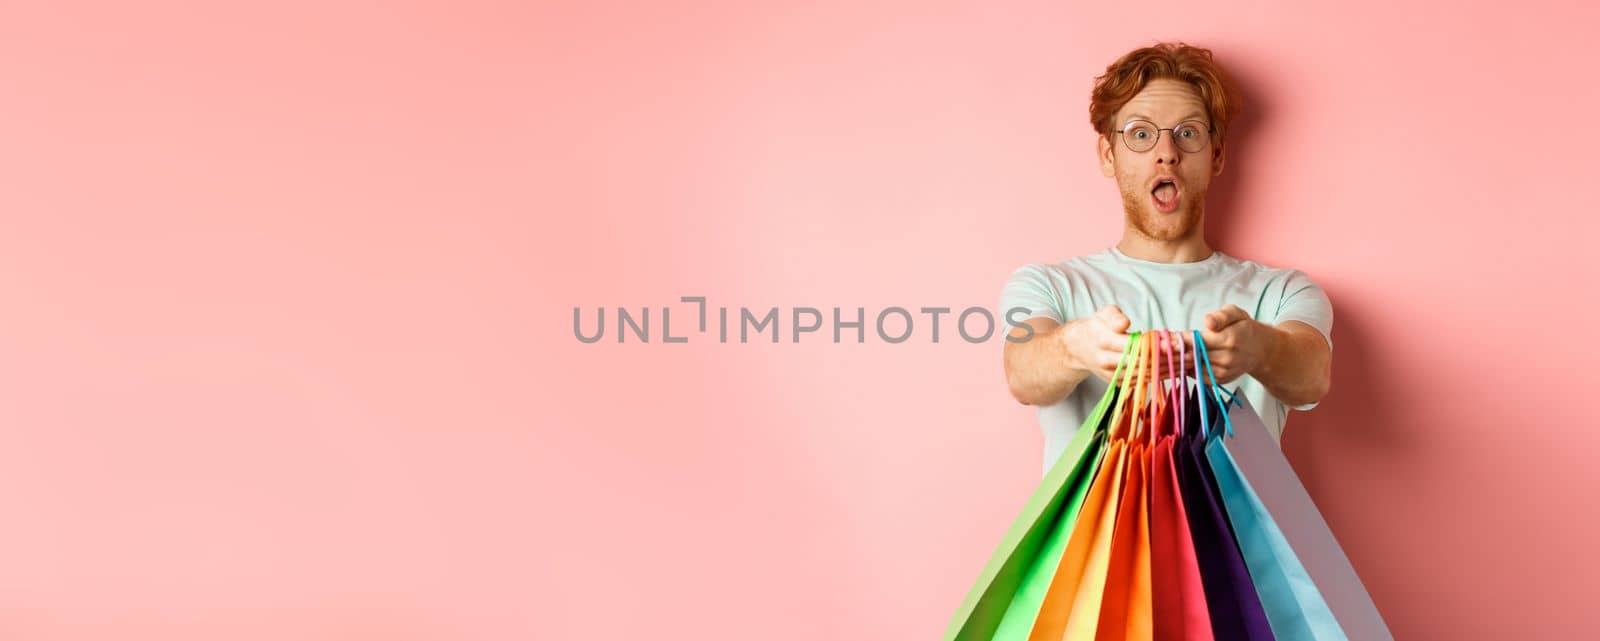 Surprised redhead man stretch out hands with shopping bags, give you gifts, standing over pink background.